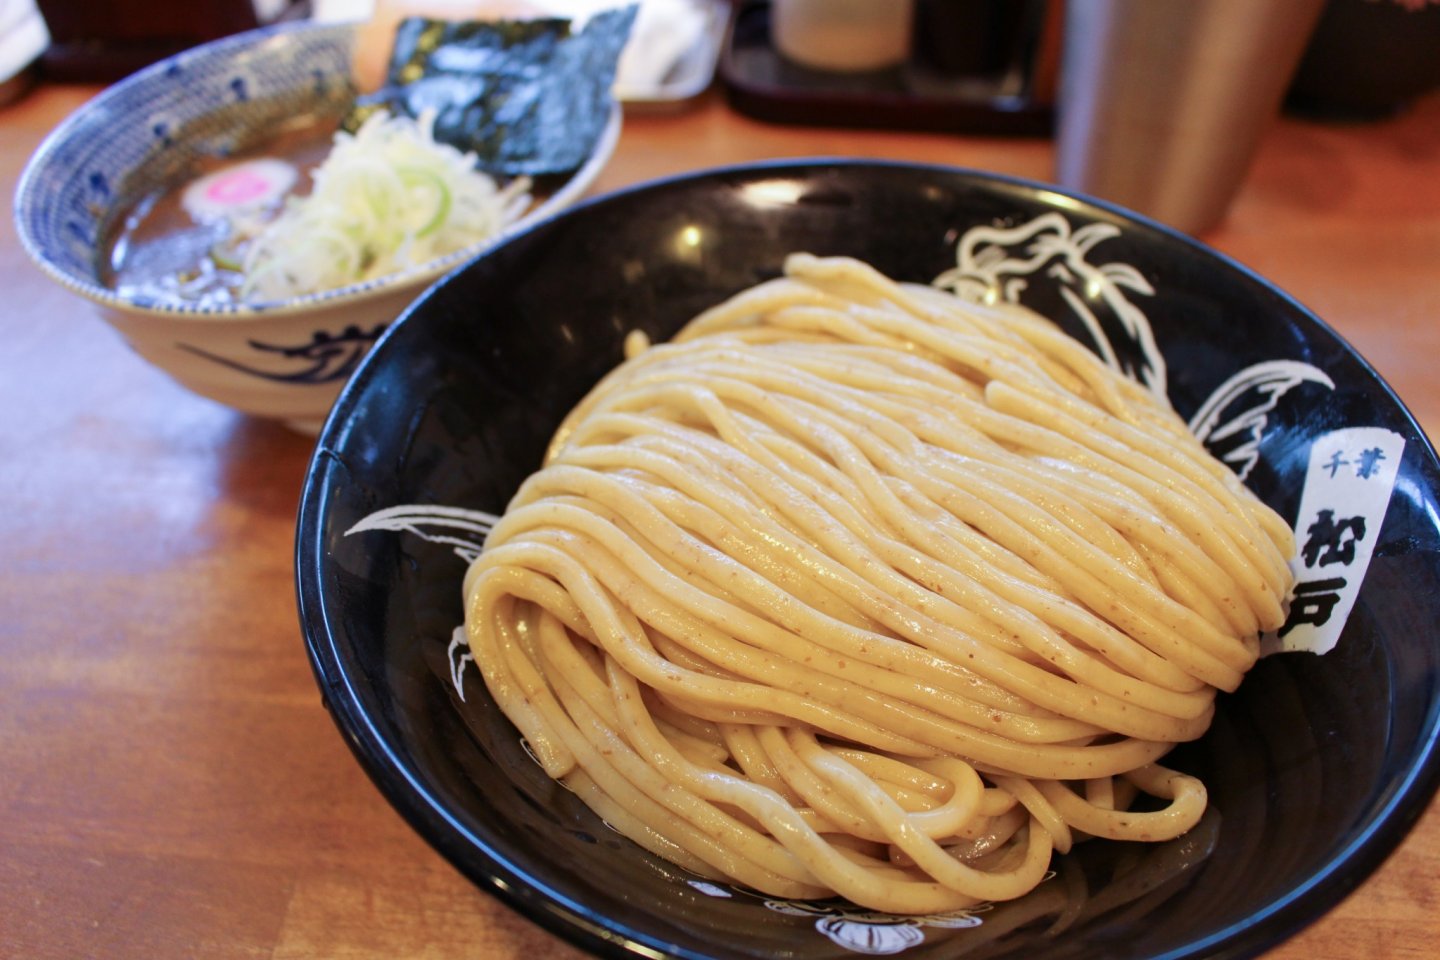 Another shot of the tsukesoba – tsukemen dipping noodles.